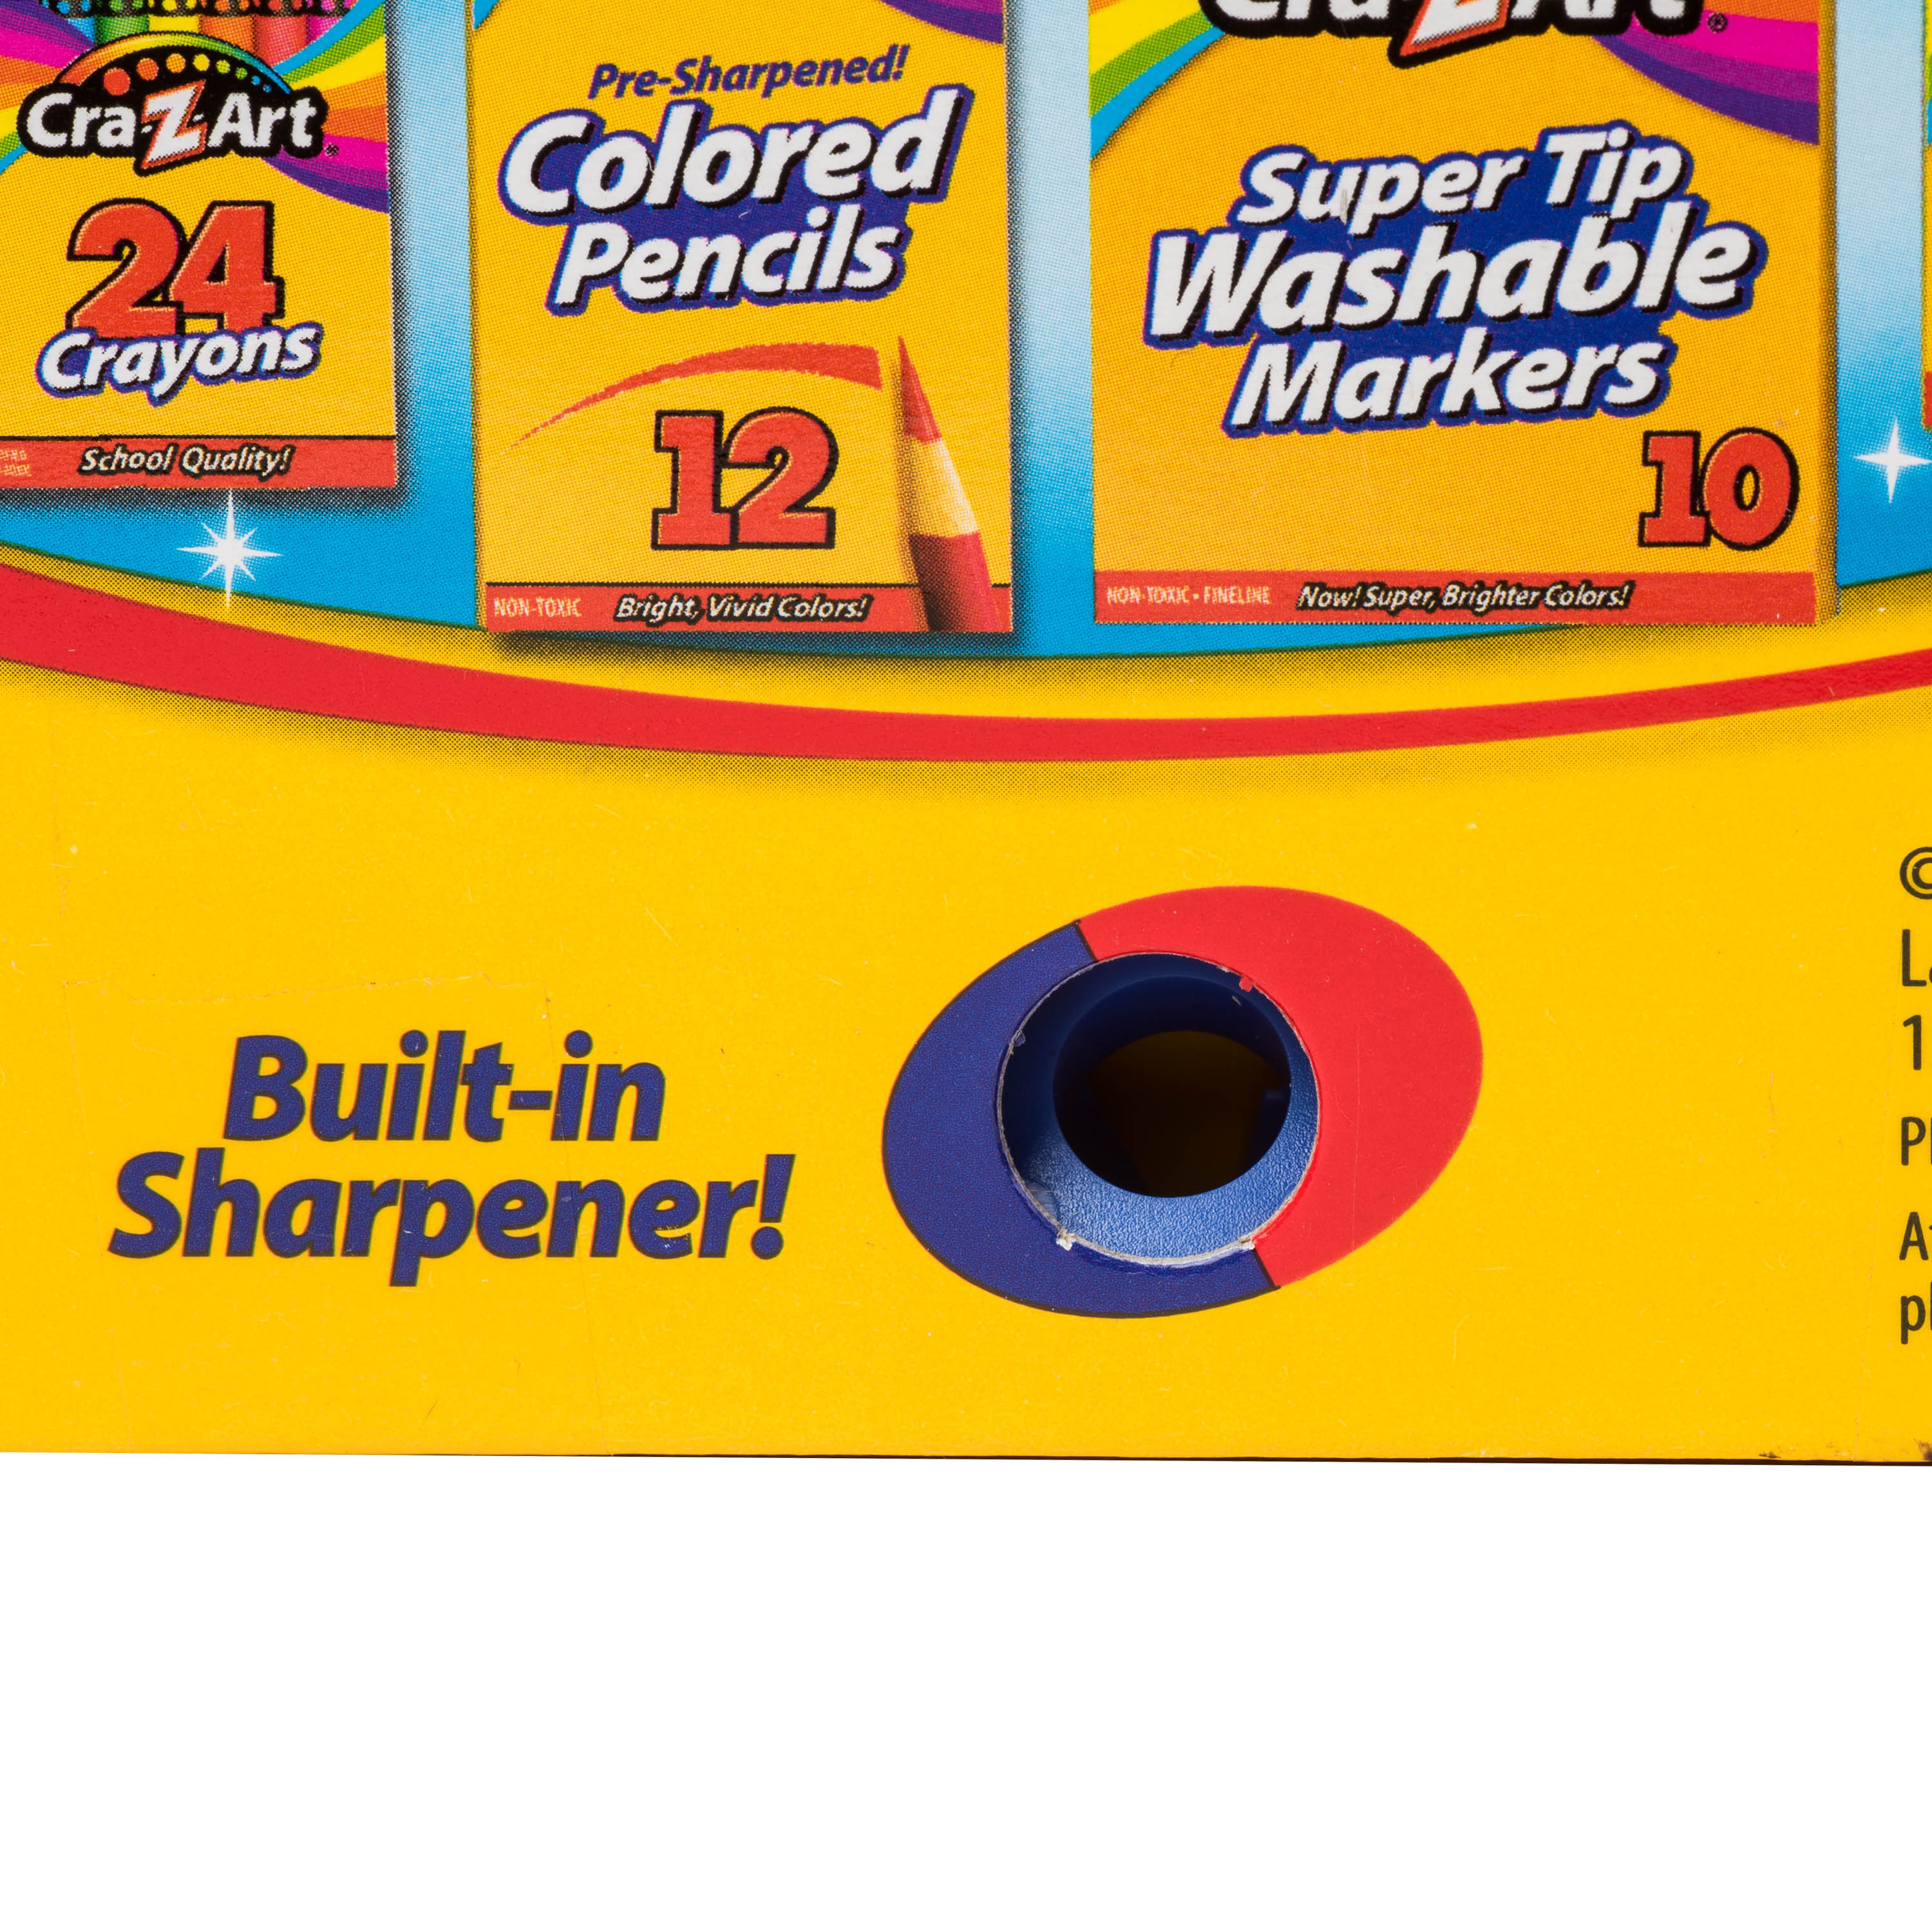 Cra-Z-Art 96 Count Crayons, Bulk Pack with Built-in Sharpener, Multicolor, Back to School - image 6 of 10